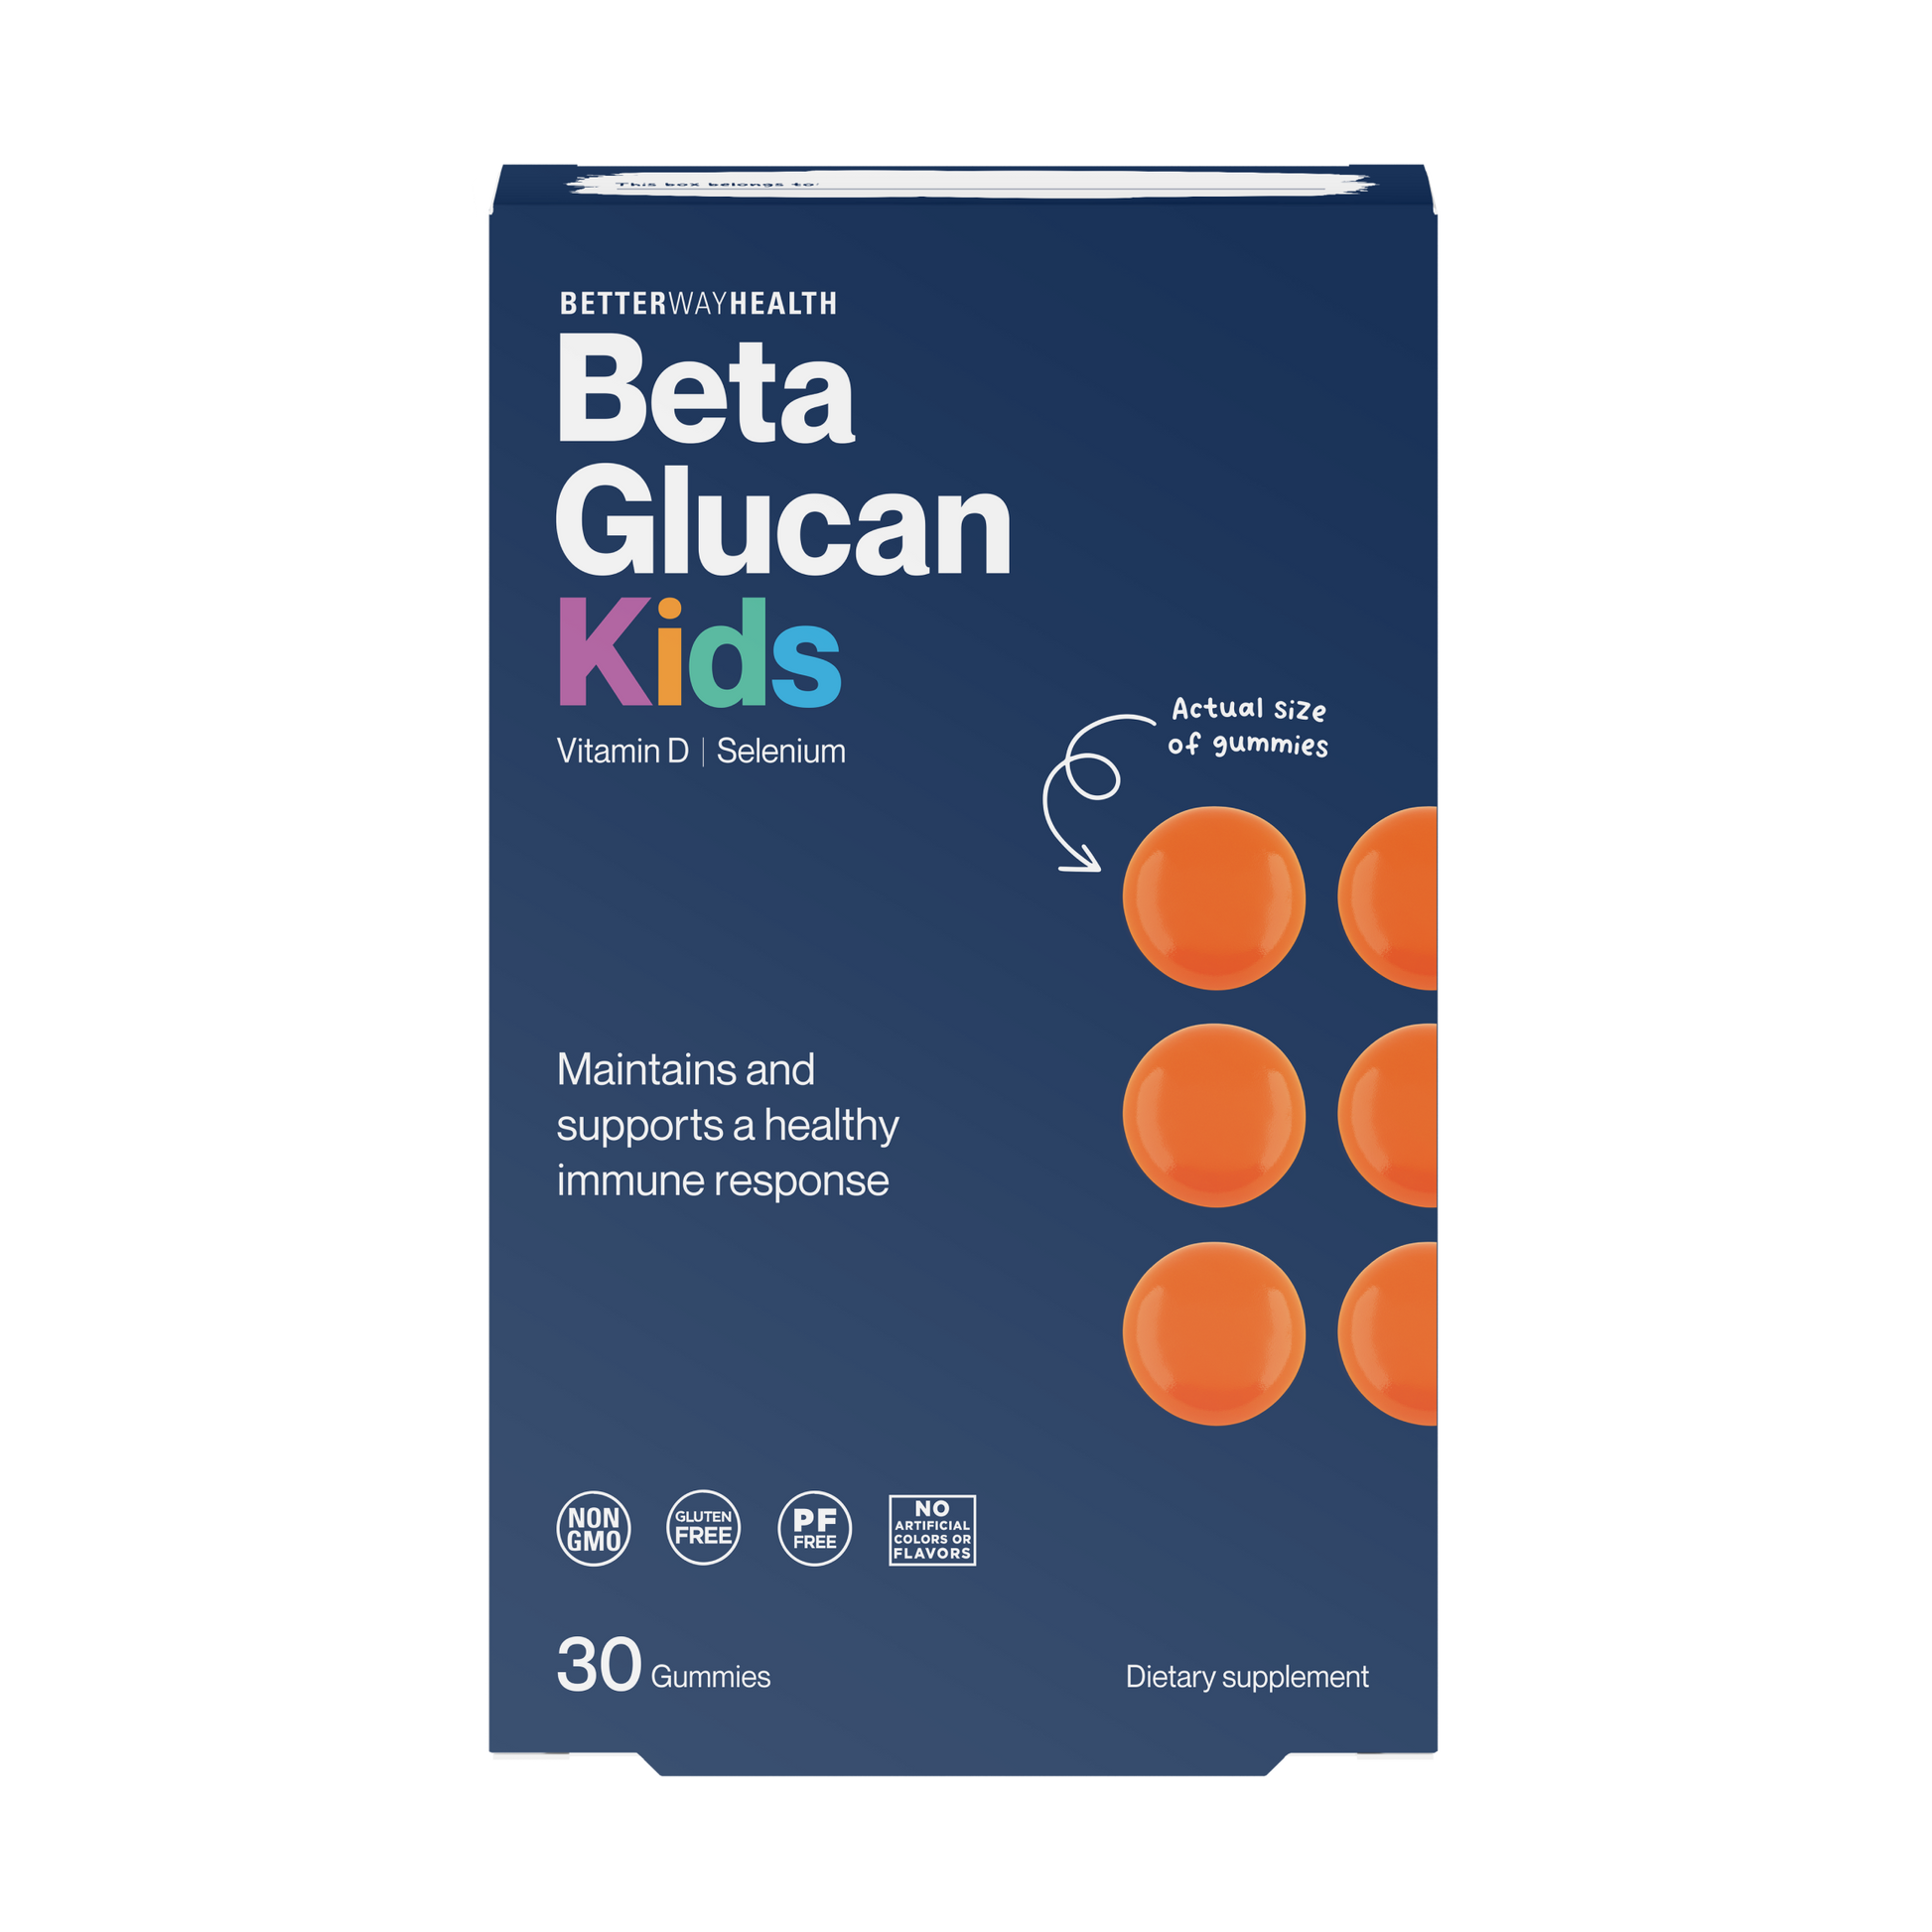 beta glucan is available for kids in a tasty gummy form